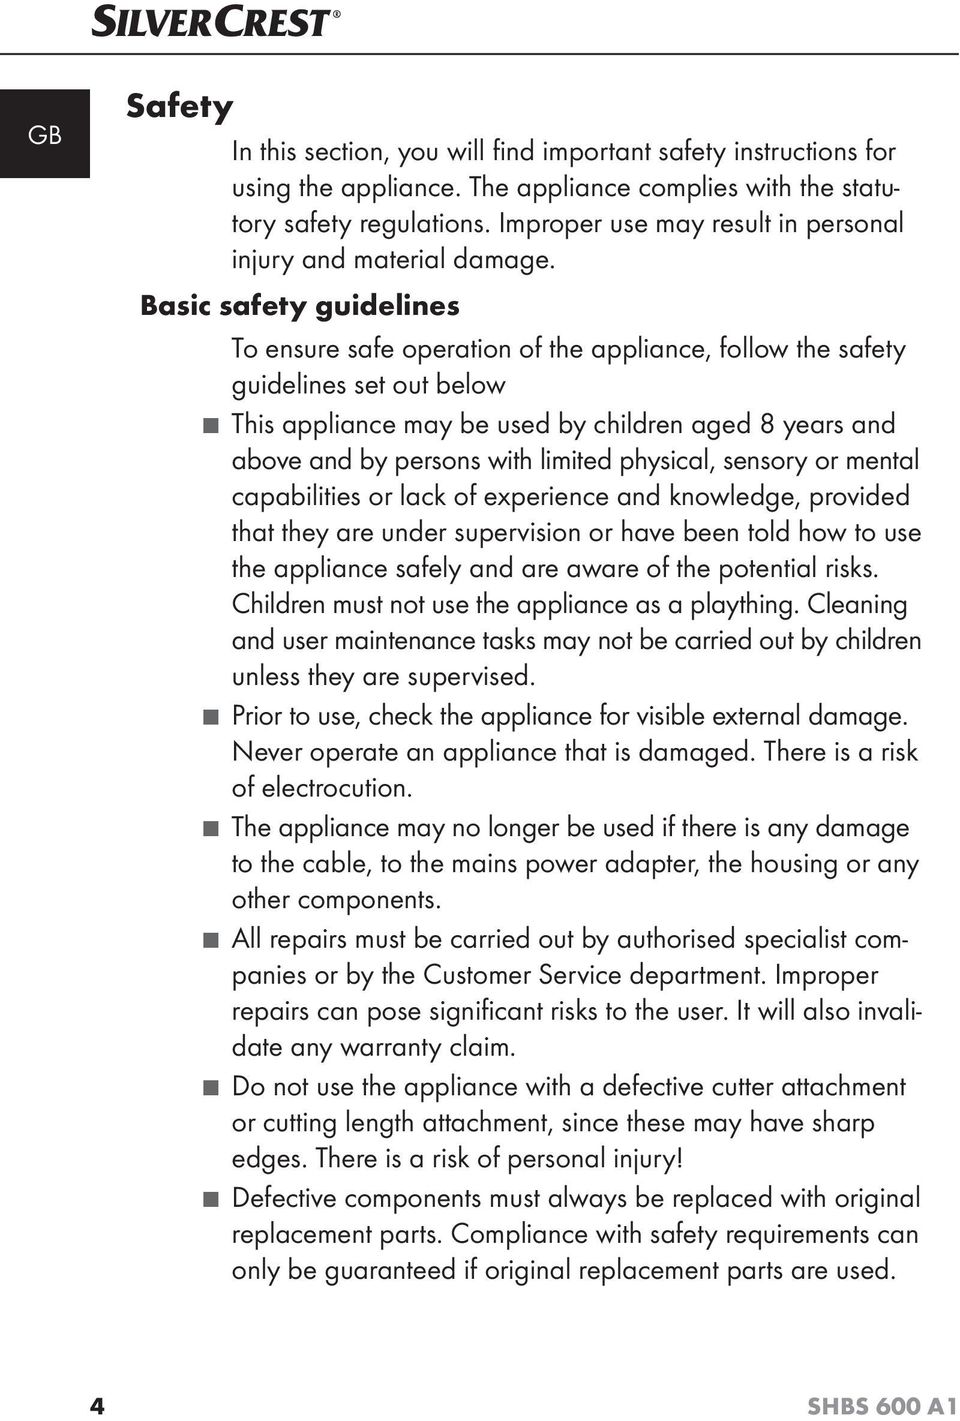 Basic safety guidelines To ensure safe operation of the appliance, follow the safety guidelines set out below This appliance may be used by children aged 8 years and above and by persons with limited